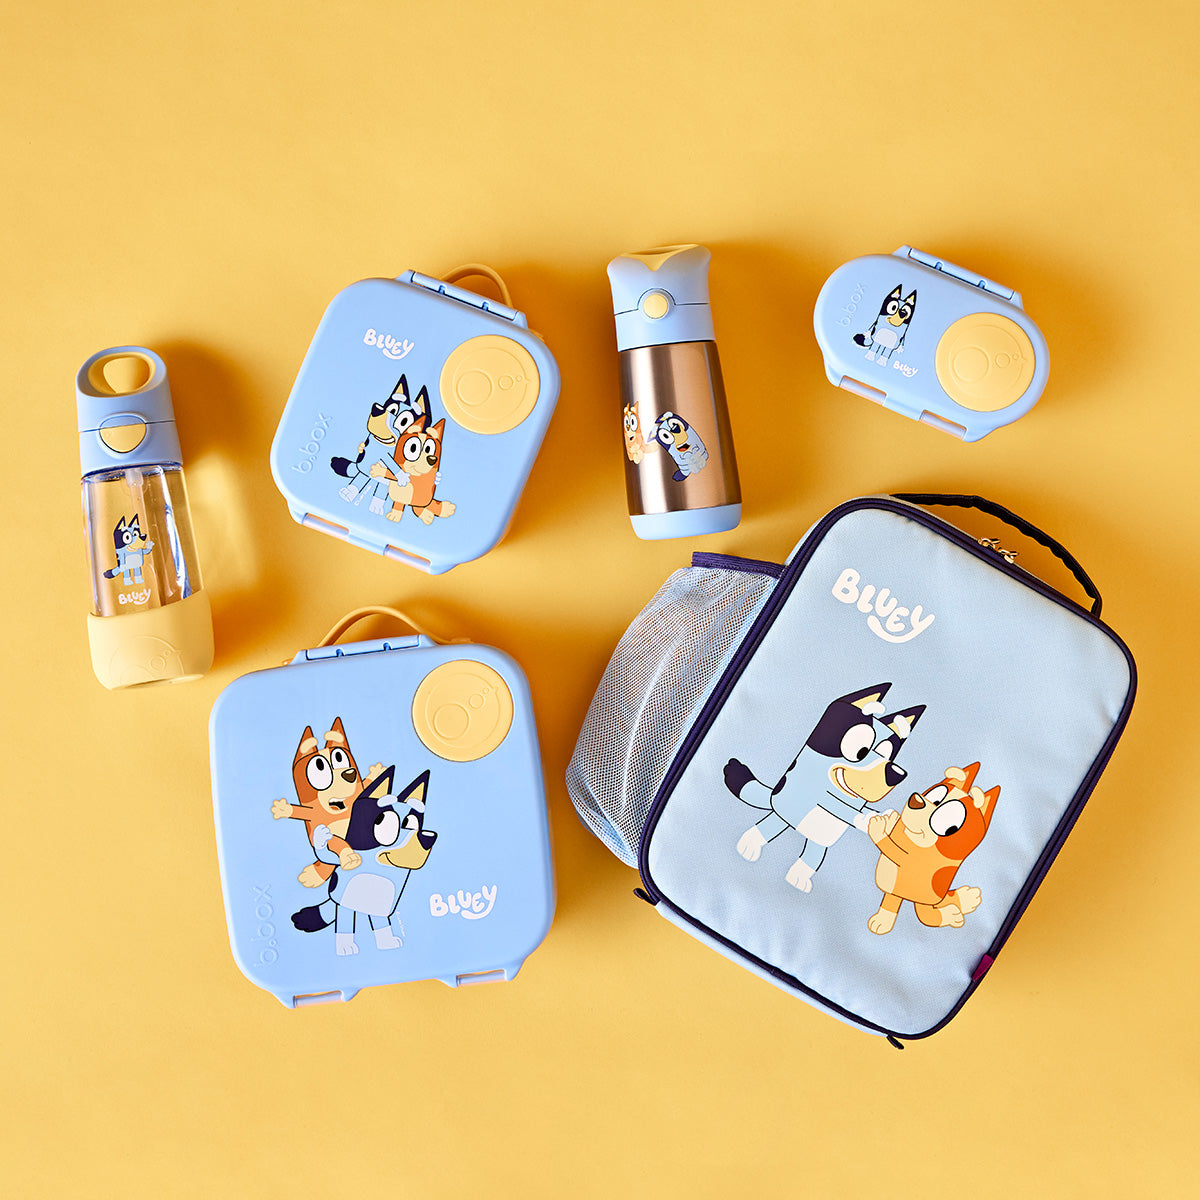 Bluey insulated drink bottle and lunch box and bag